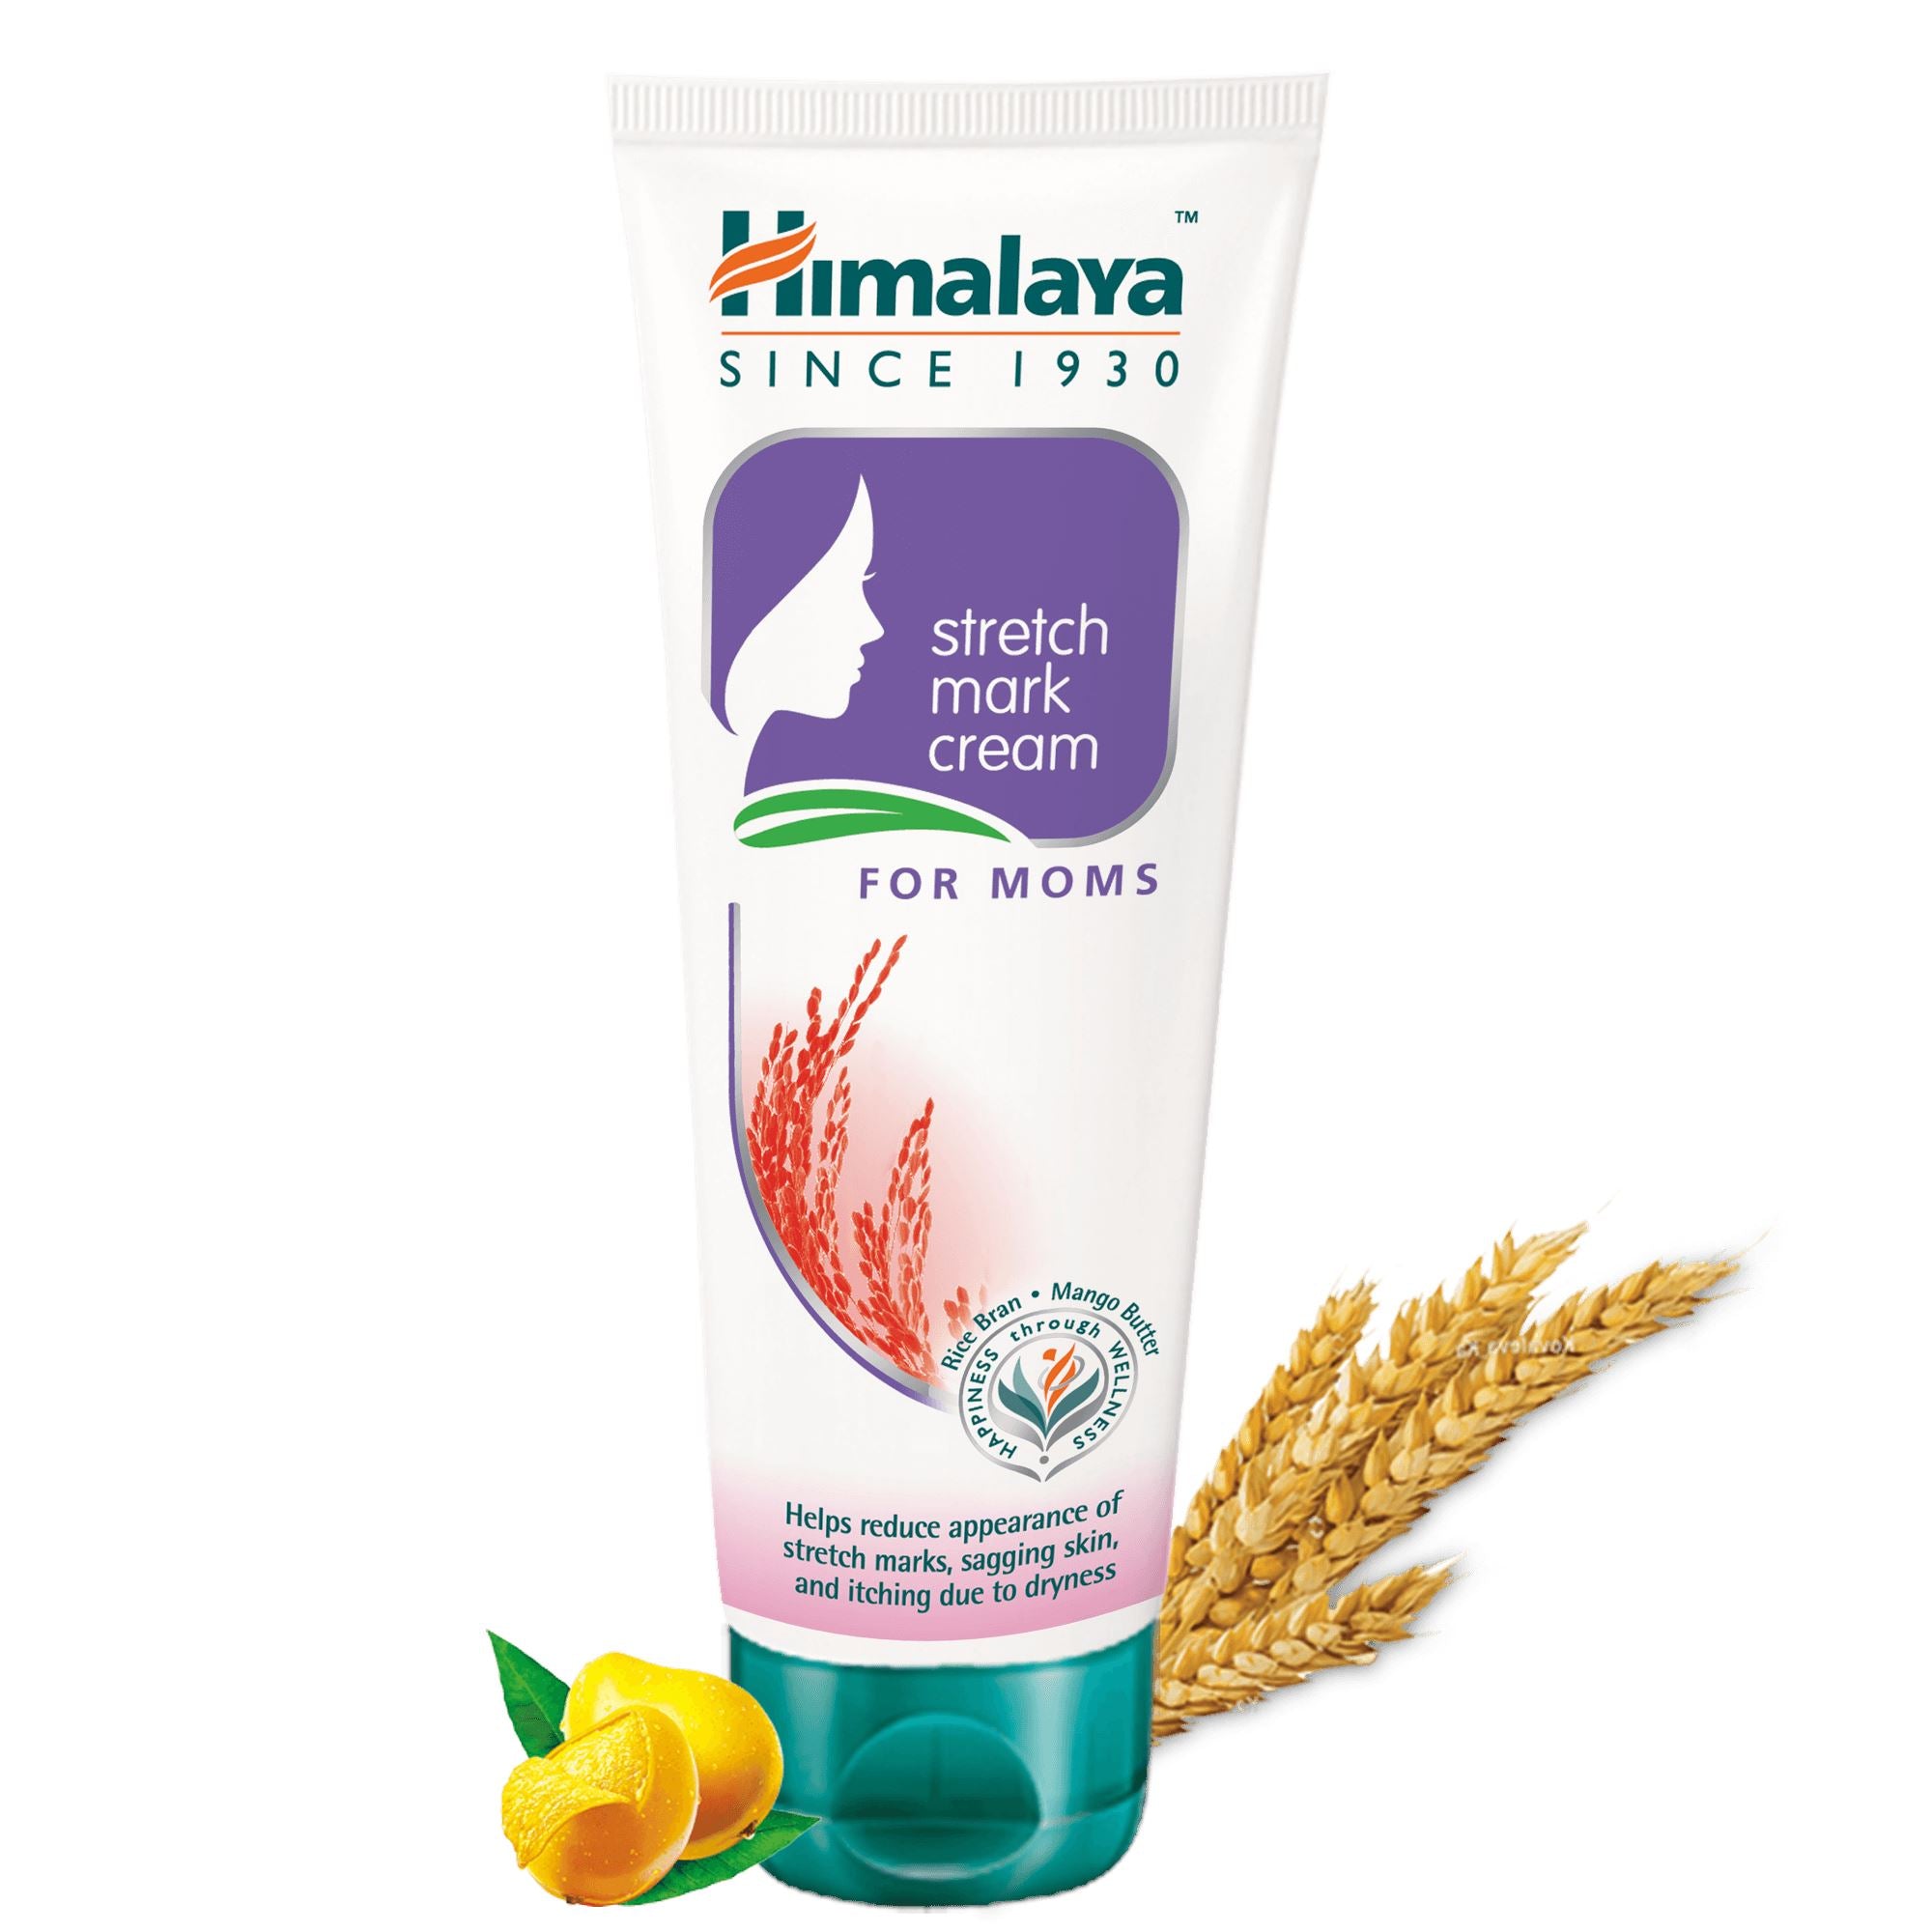 Himalaya Stretch Mark Cream - Helps improve skin elasticity and reduce the appearance of stretch marks